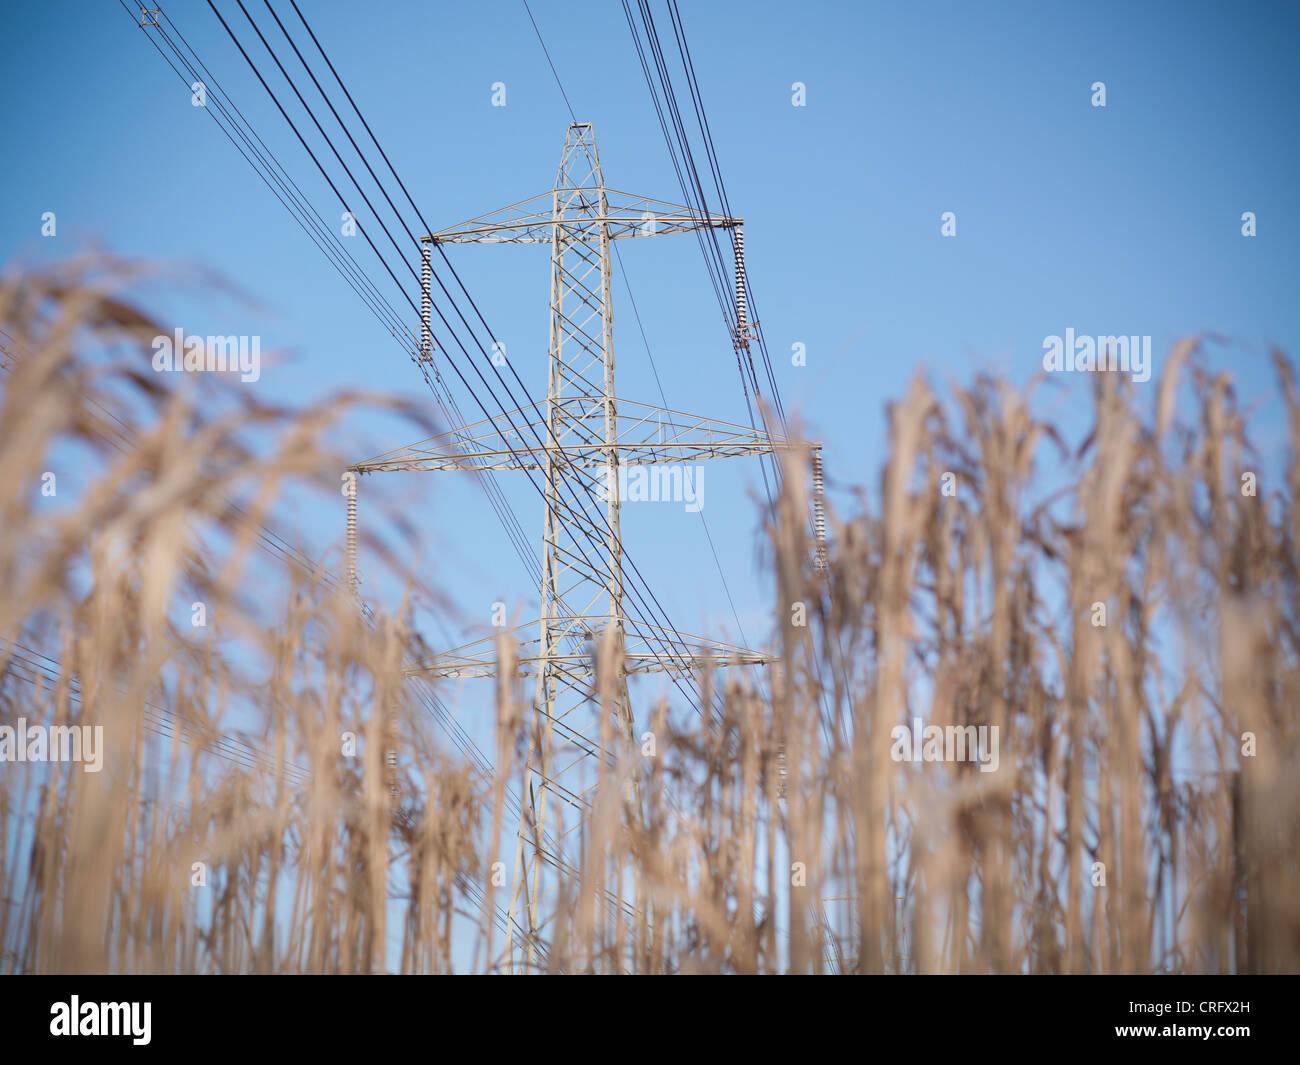 Power lines over field of elephant grass Stock Photo